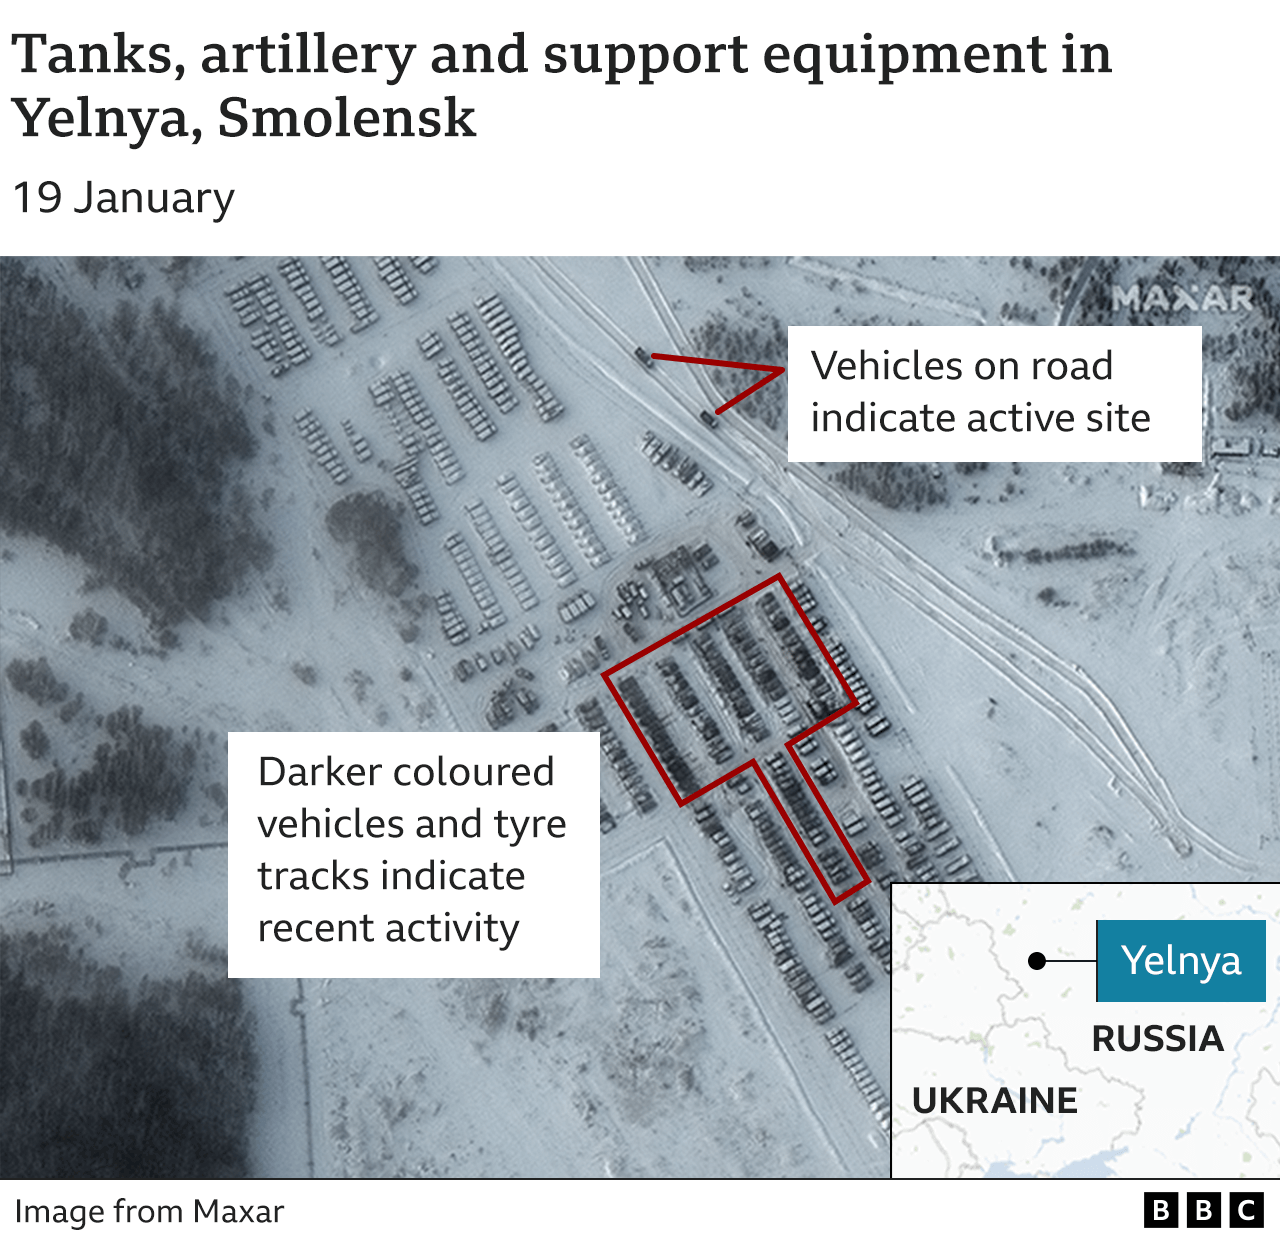 Satellite image showing tanks, artillery and support equipment in Yelnya